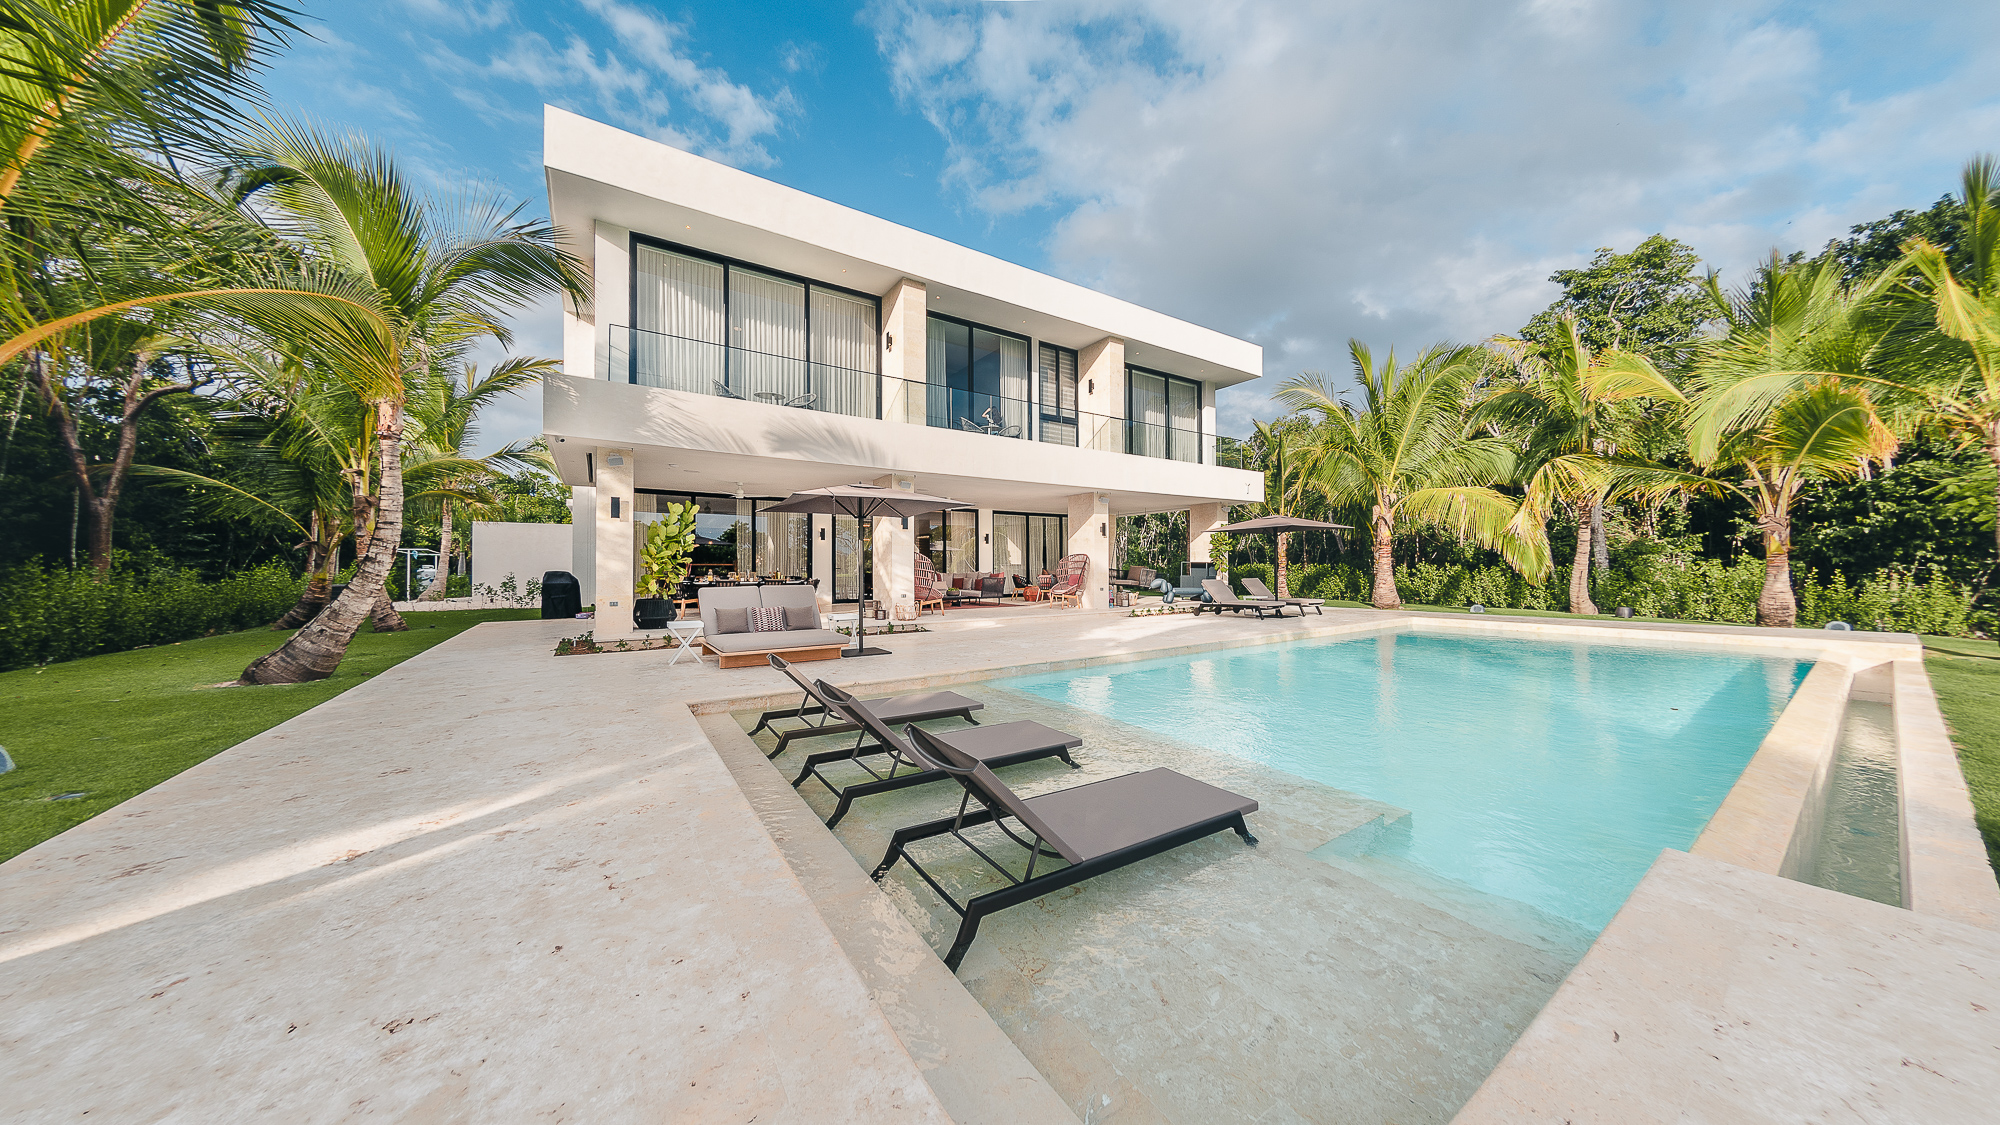 6 Bedroom Contemporary Villa for sale at Puntacana Resort and Club